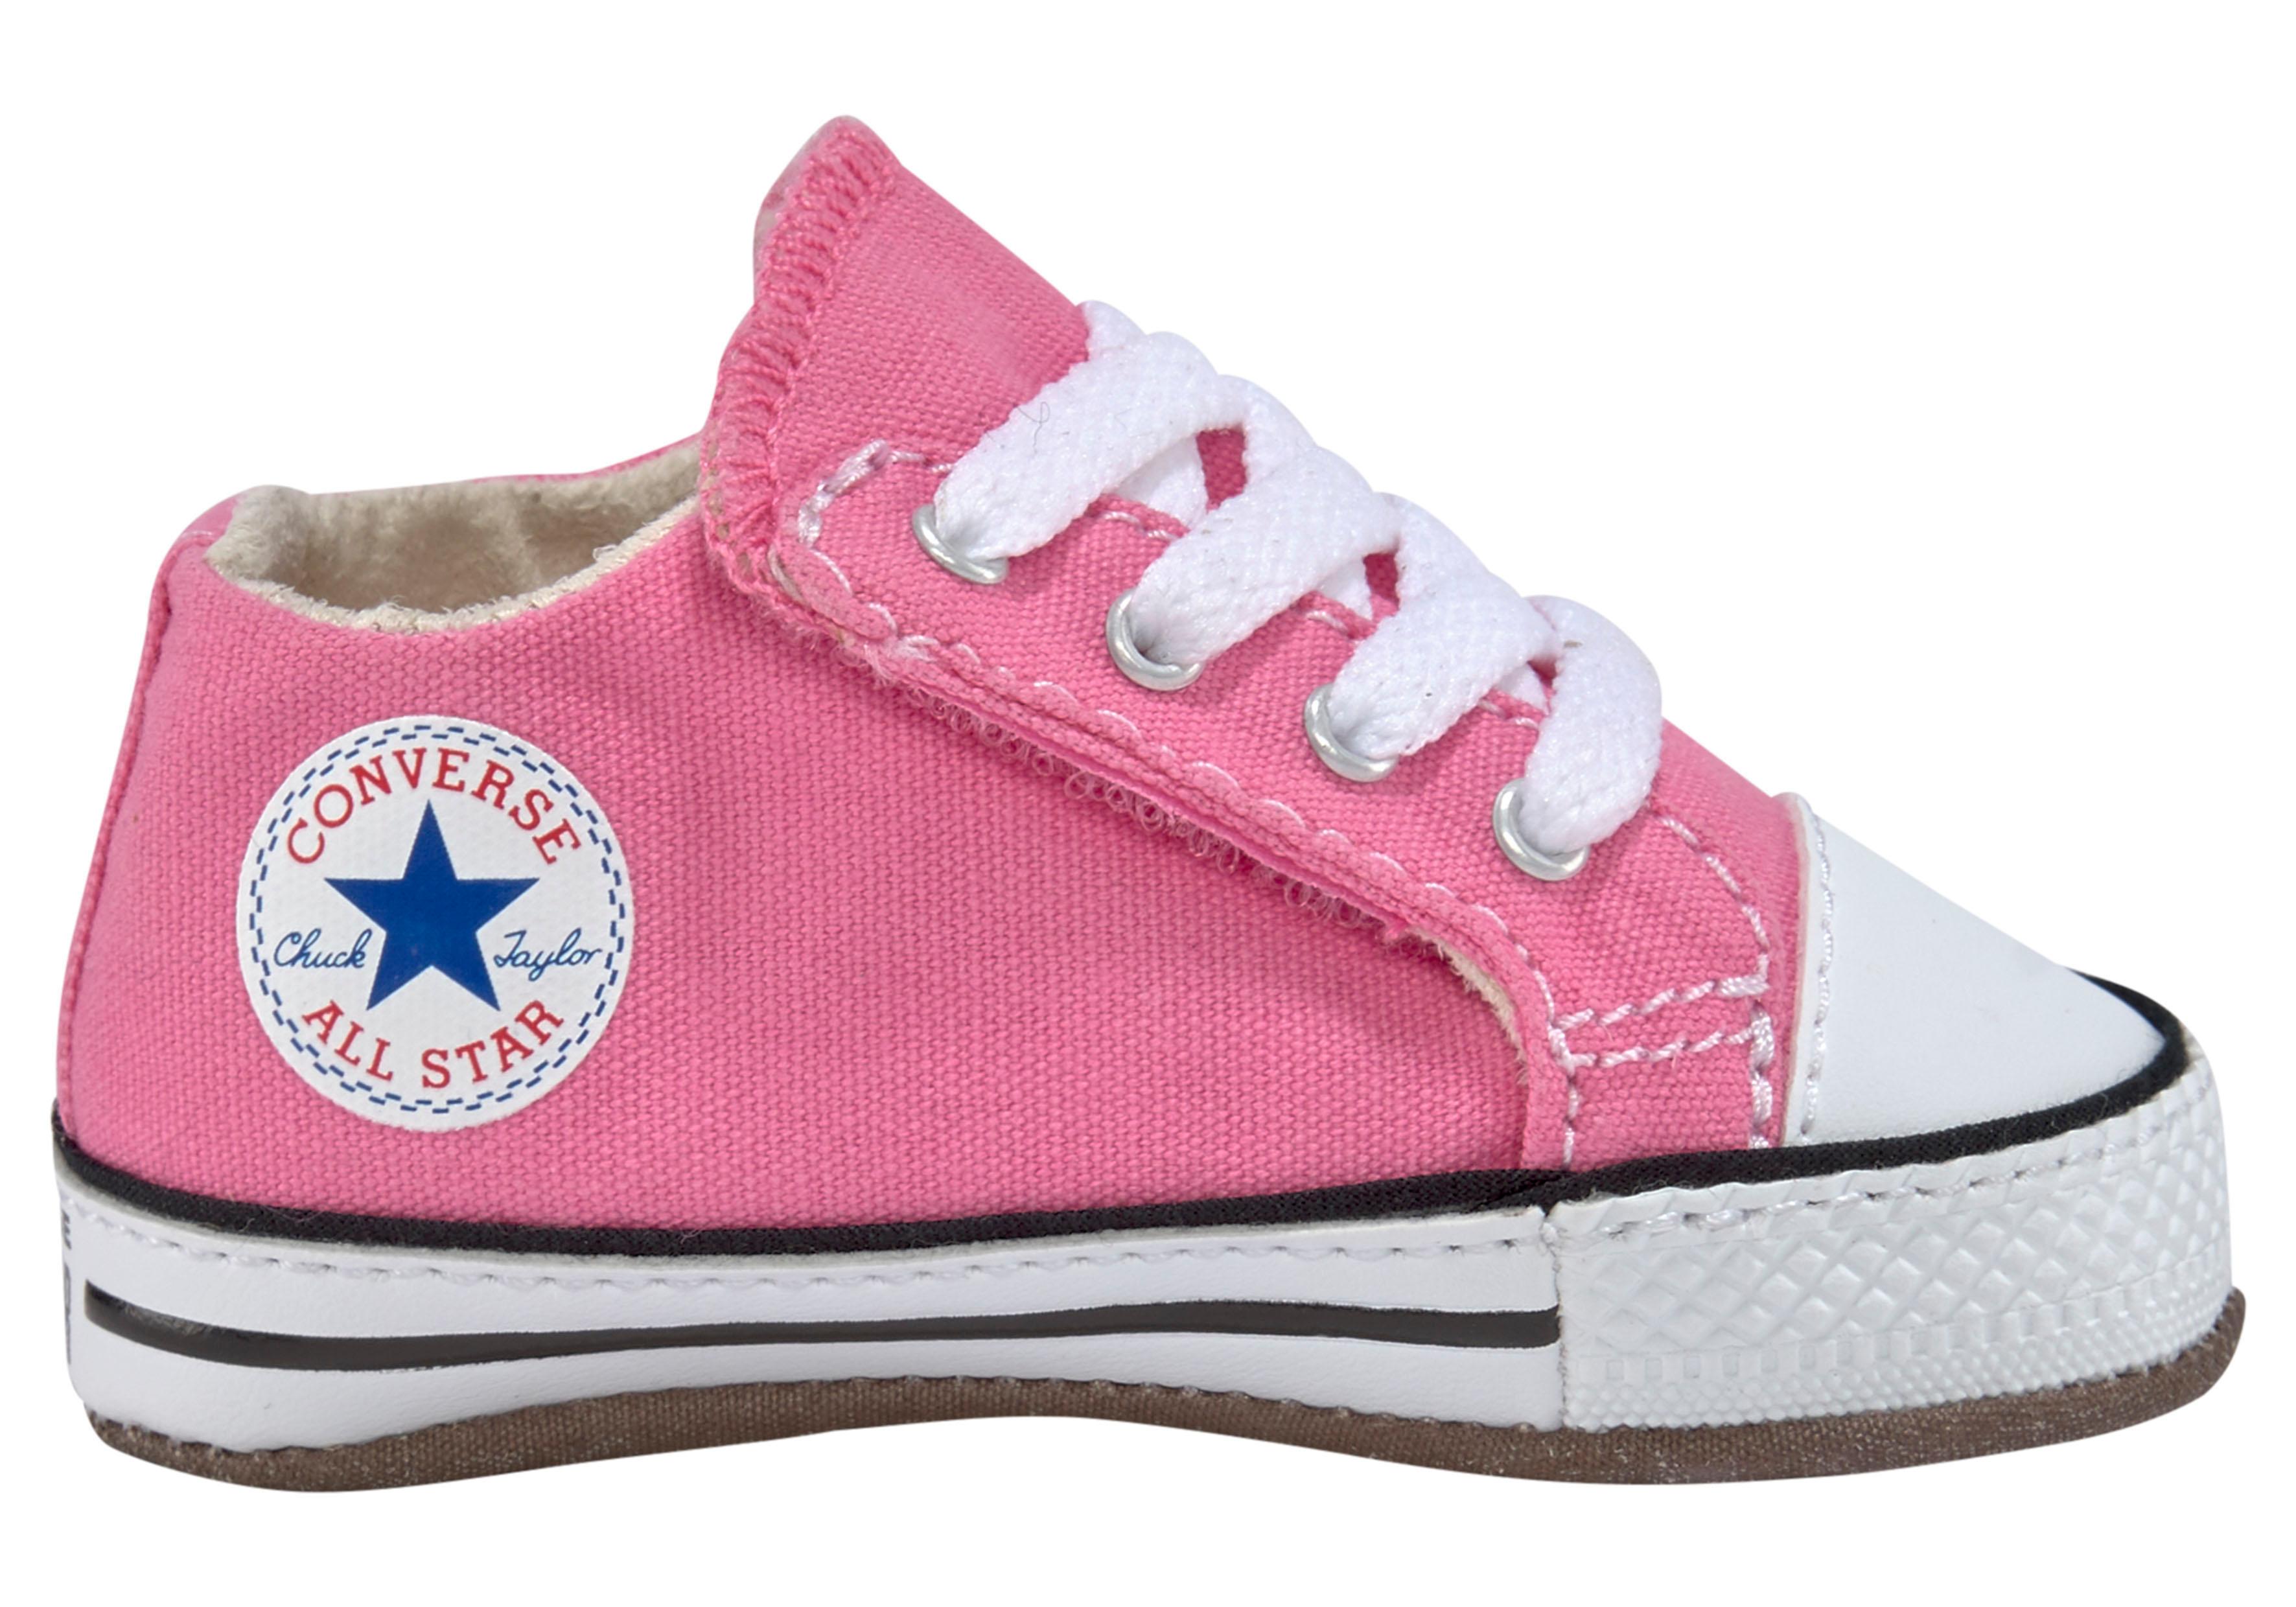 Converse Sneaker "Chuck Taylor All Star CRIBSTER CANVAS COL"